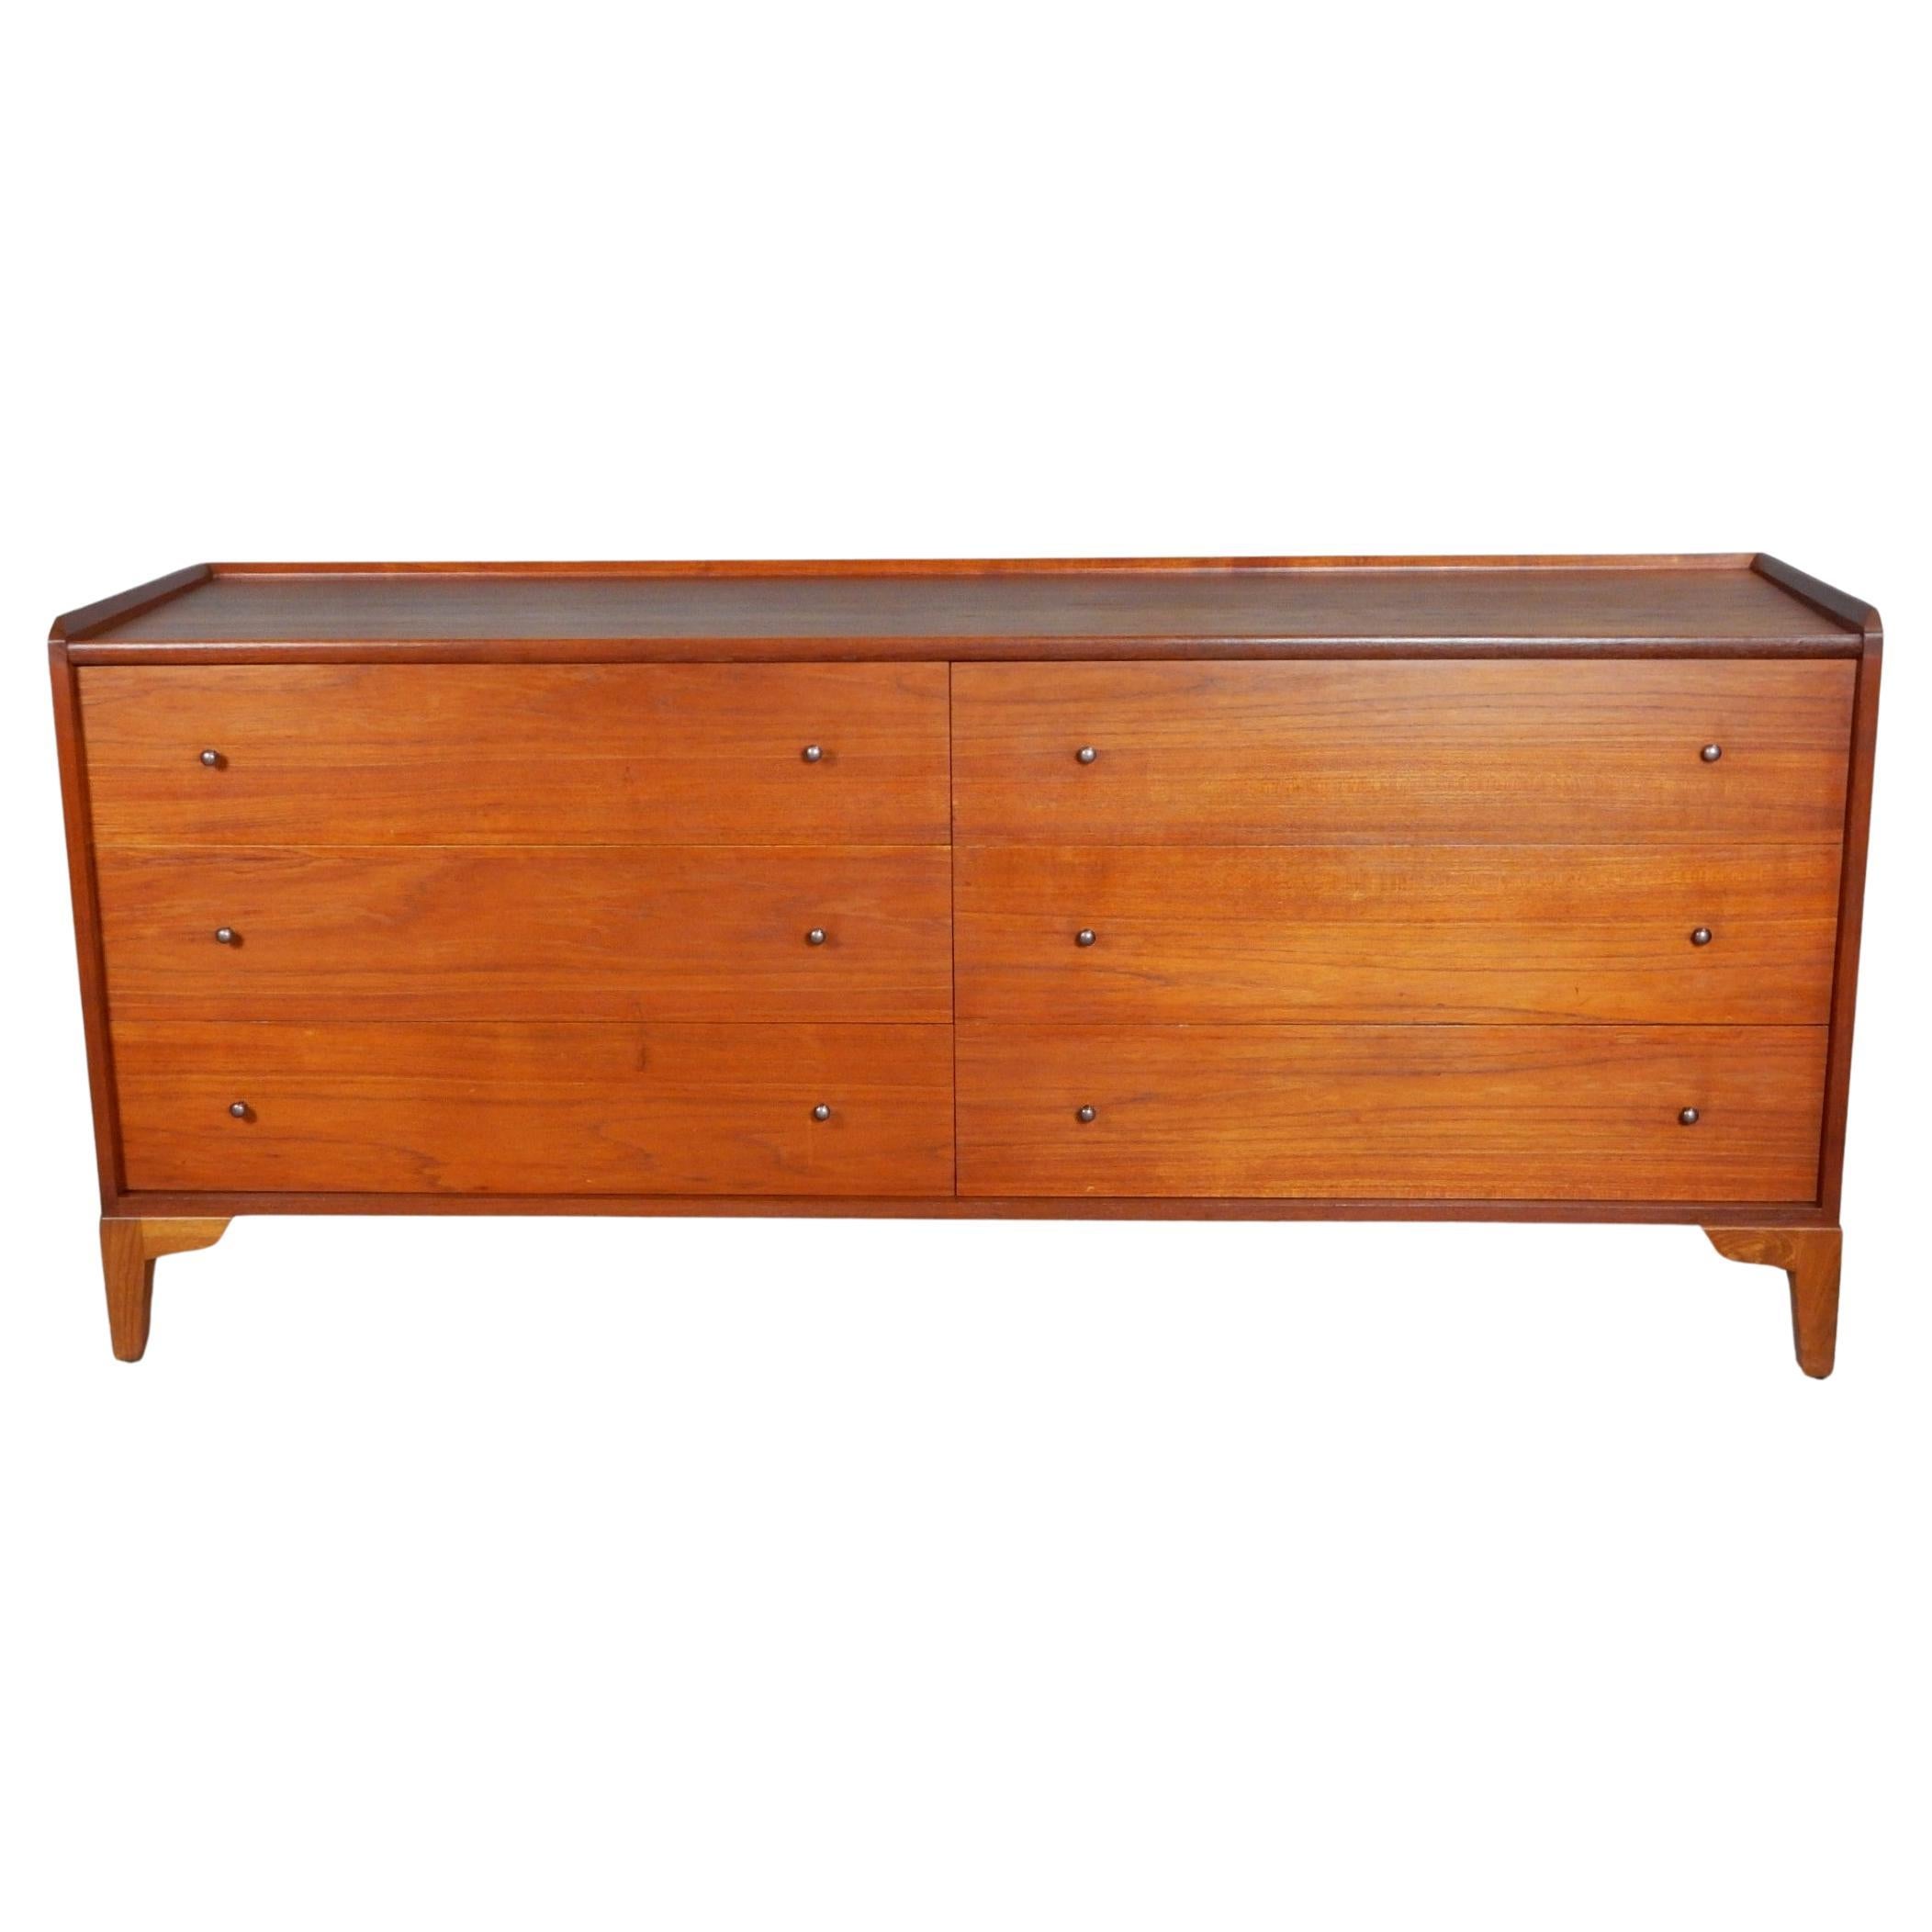 Gorgeous two-tone Walnut low chest of drawers designed by Charles Pechanec circa 1950's.
Charles Pechanec was a furniture designer and maker who worked in California during the mid-20th century. He is known for his modernist designs that often